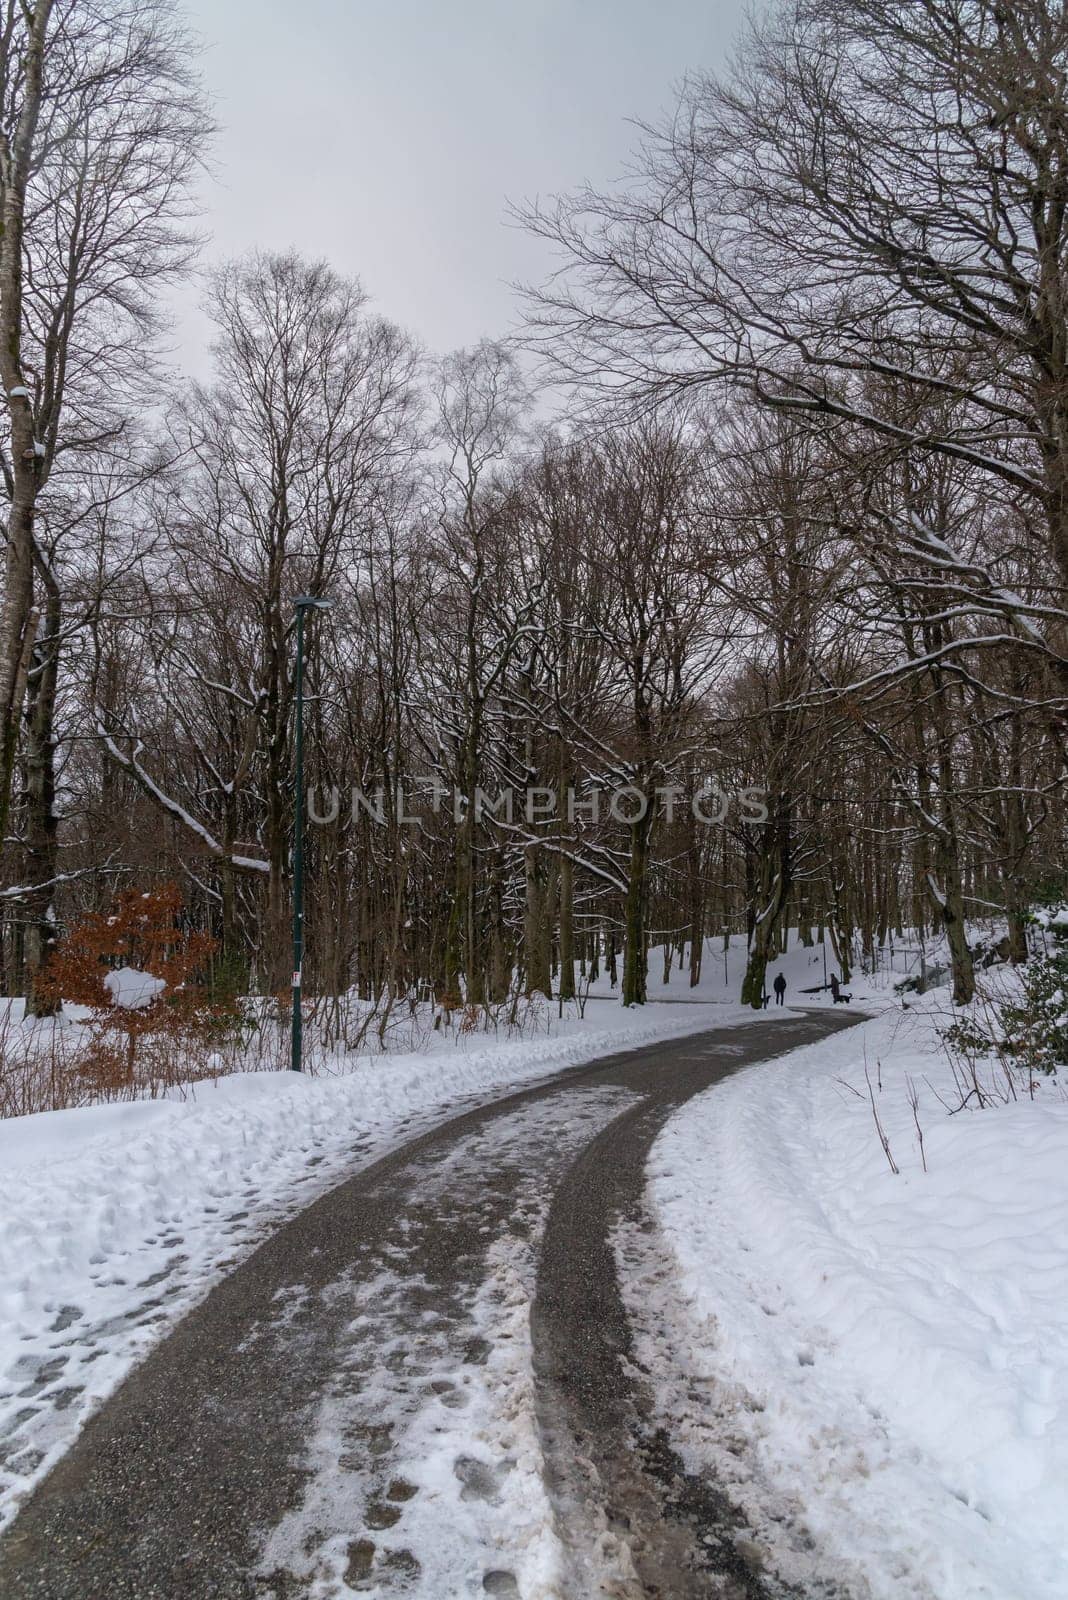 A winding pathway covered with snow meanders through a dense forest in winter, creating a peaceful scene of natural beauty.